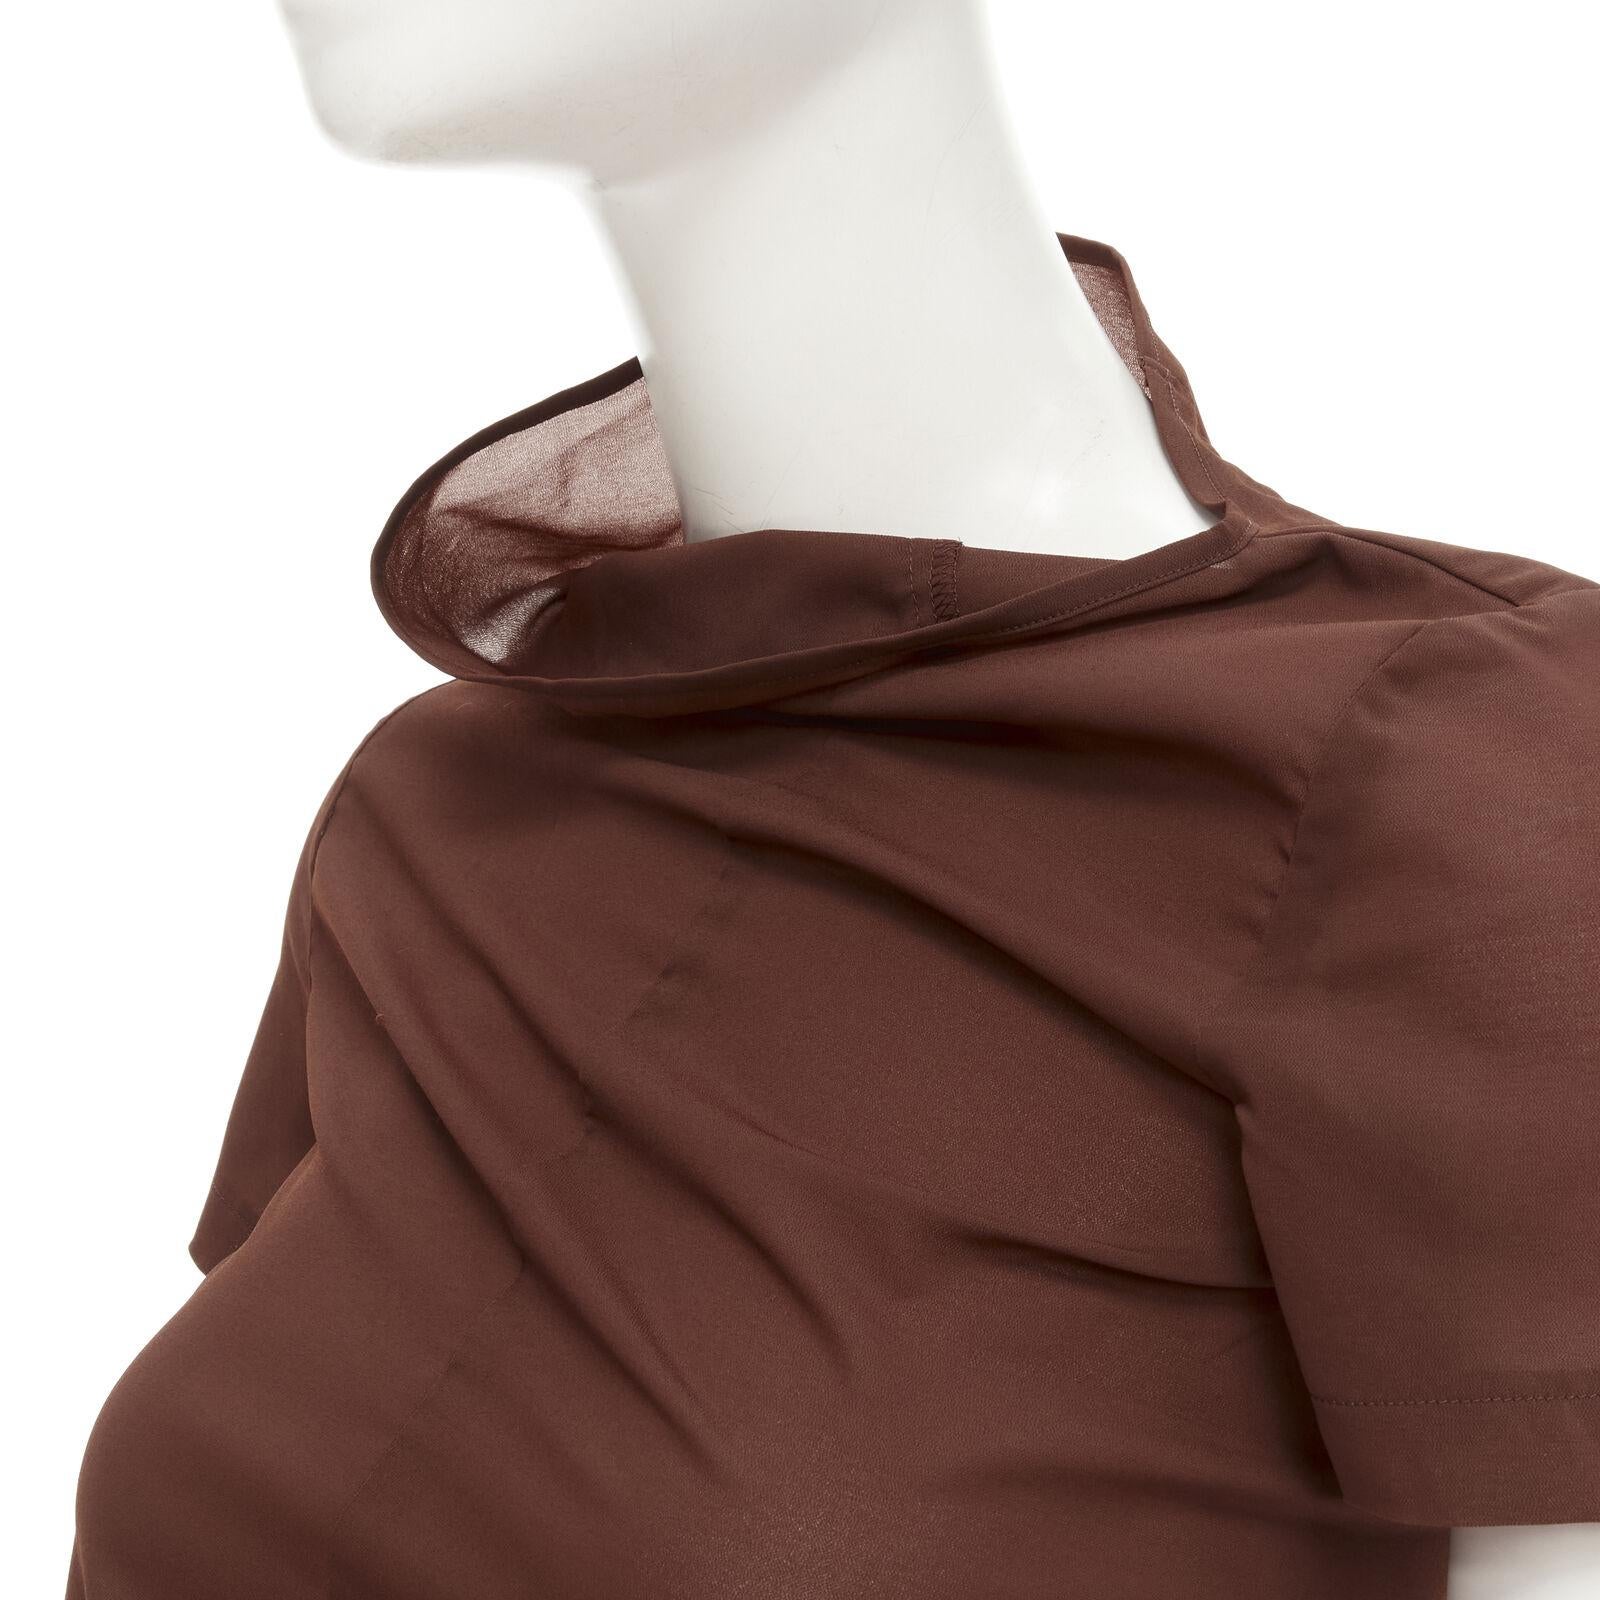 rare COMME DES GARCONS Vintage 1997 brown bias cowl neck irregular top
Reference: CRTI/A00735
Brand: Comme Des Garcons
Designer: Rei Kawakubo
Collection: 1997
Material: Polyester, Blend
Color: Brown
Pattern: Solid
Closure: Pull On
Made in: